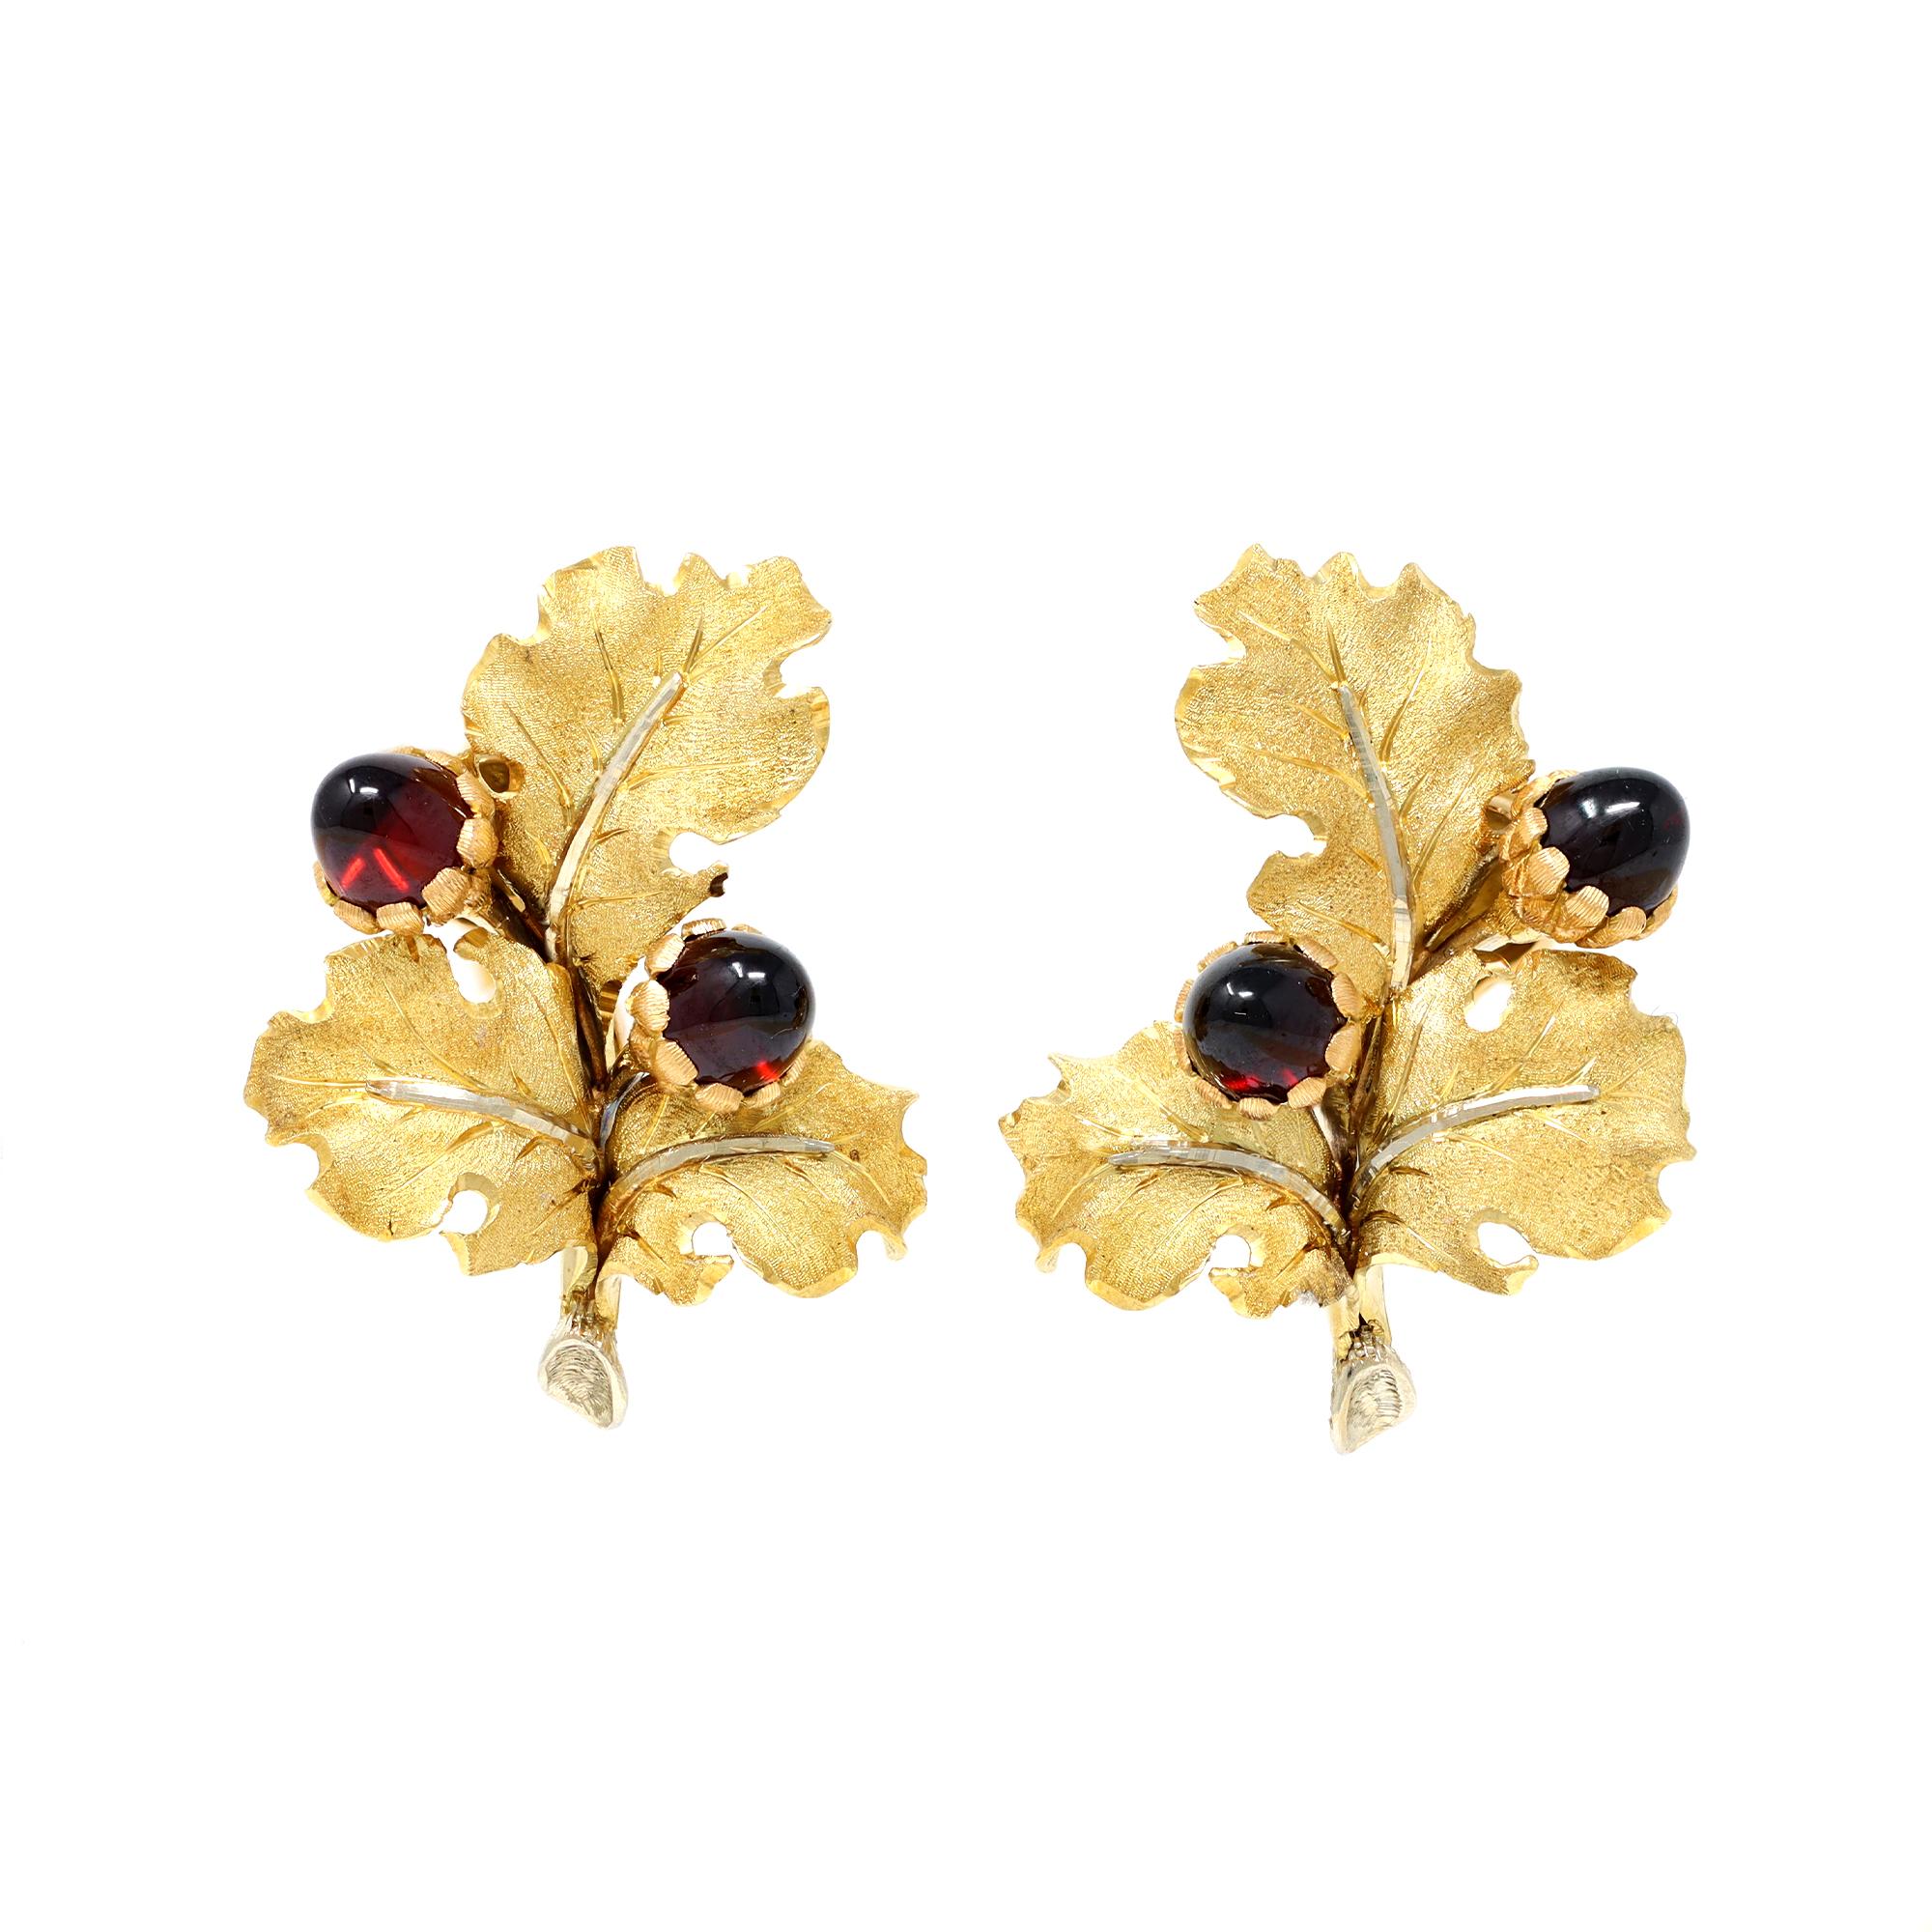 A fantastic set including a brooch and clip-on earrings by Mario Buccellati, Italy, c.1950, the brooch designed as a series of textured gold leaves set with cabochon garnet acorns, gross weight 18.1 grams, measuring 2 ⅛ by 1 ½ inches; the clip-on of